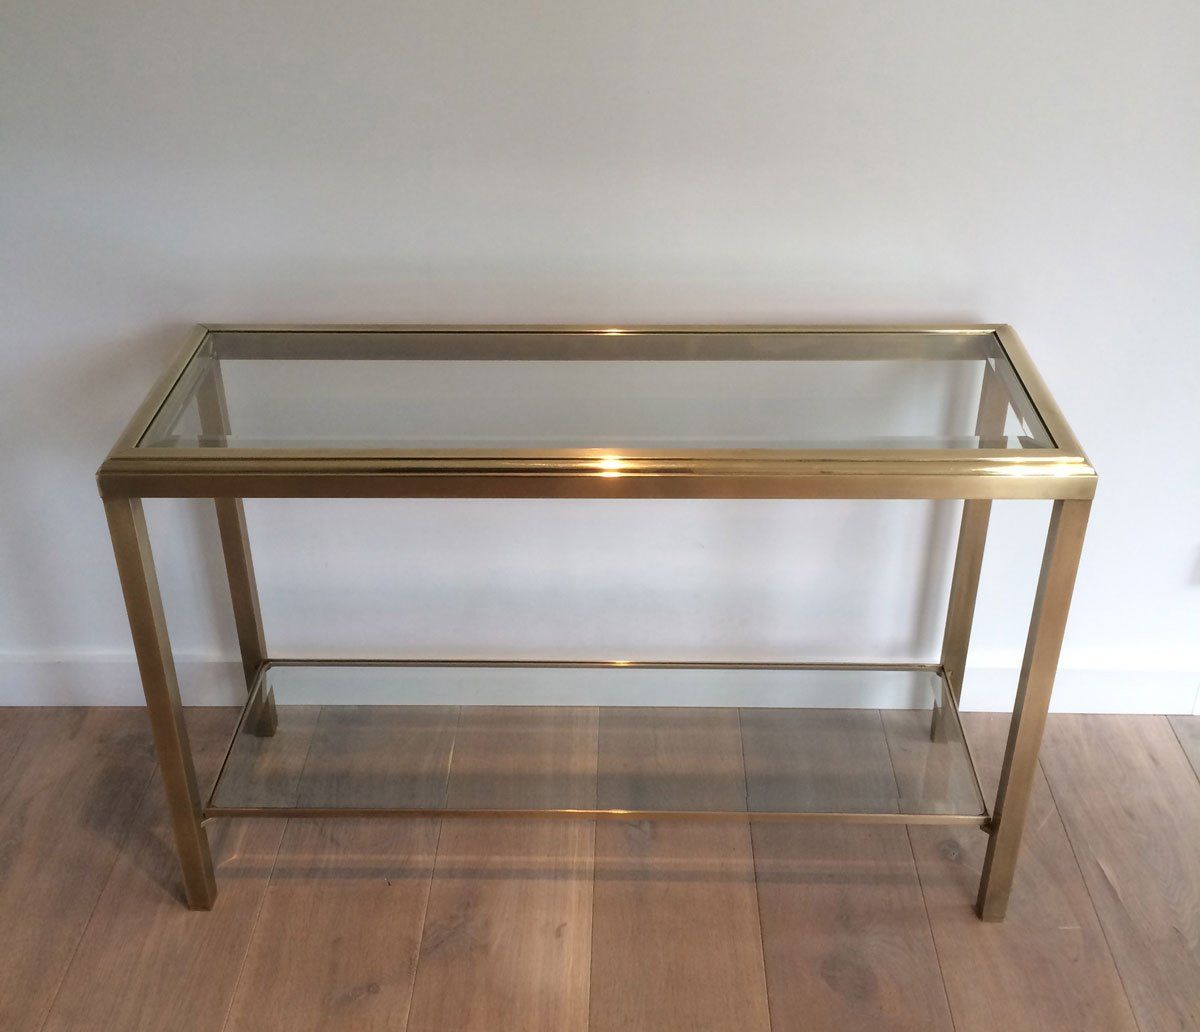 French Brass Console Table For Sale At Pamono Inside Hammered Antique Brass Modern Console Tables (View 2 of 16)